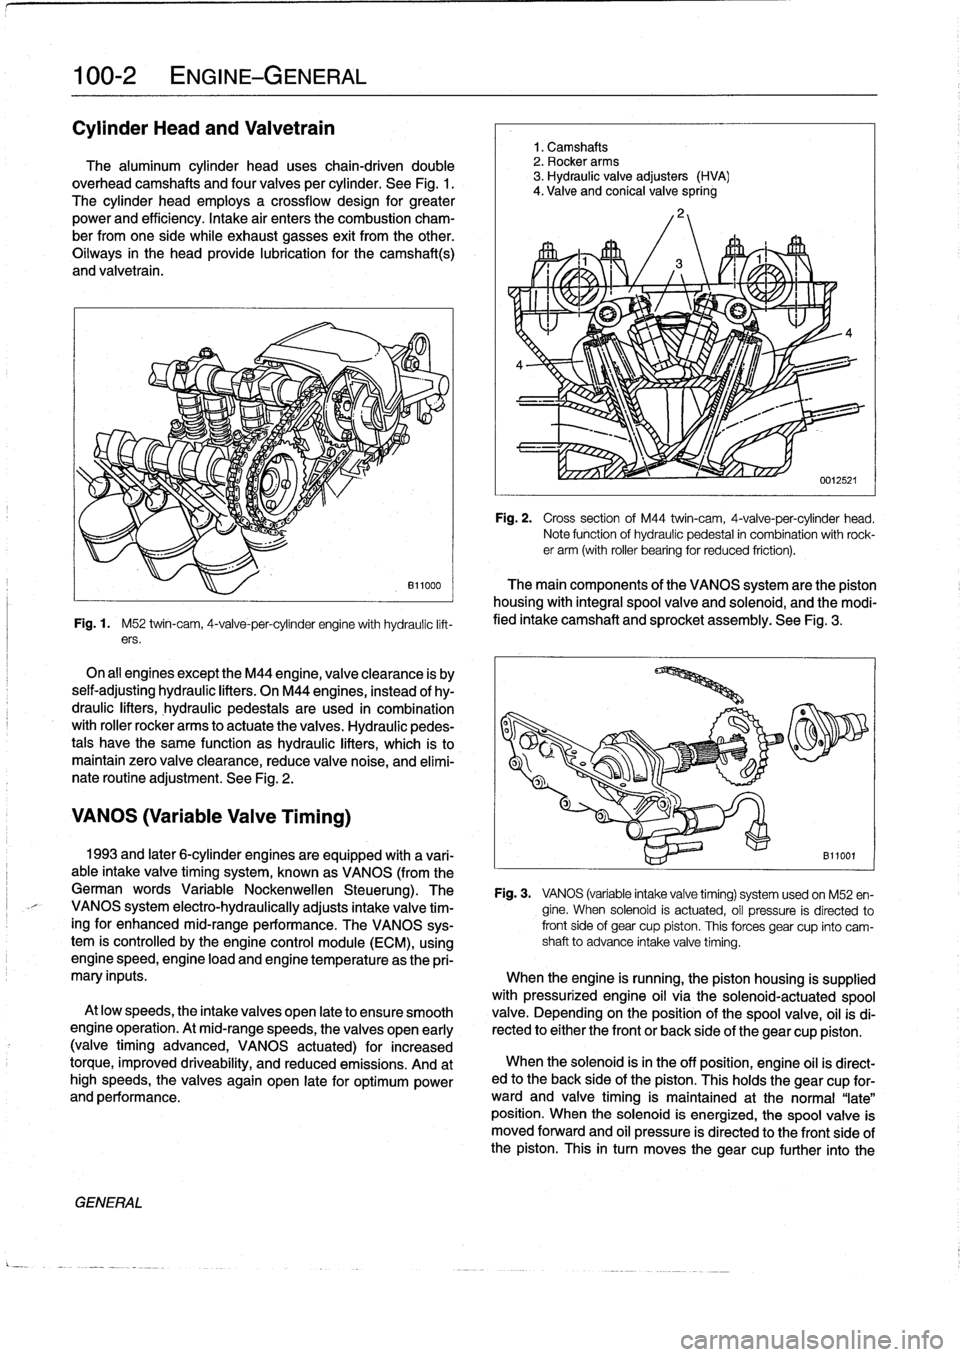 BMW 318i 1997 E36 Workshop Manual 
100-2
ENGINE-GENERAL

Cylinder
Head
and
Valvetrain

The
aluminum
cylinder
head
uses
chain-driven
double
overhead
camshafts
and
four
valves
per
cylinder
.
See
Fig
.
1
.

The
cylinder
head
employs
a
cr